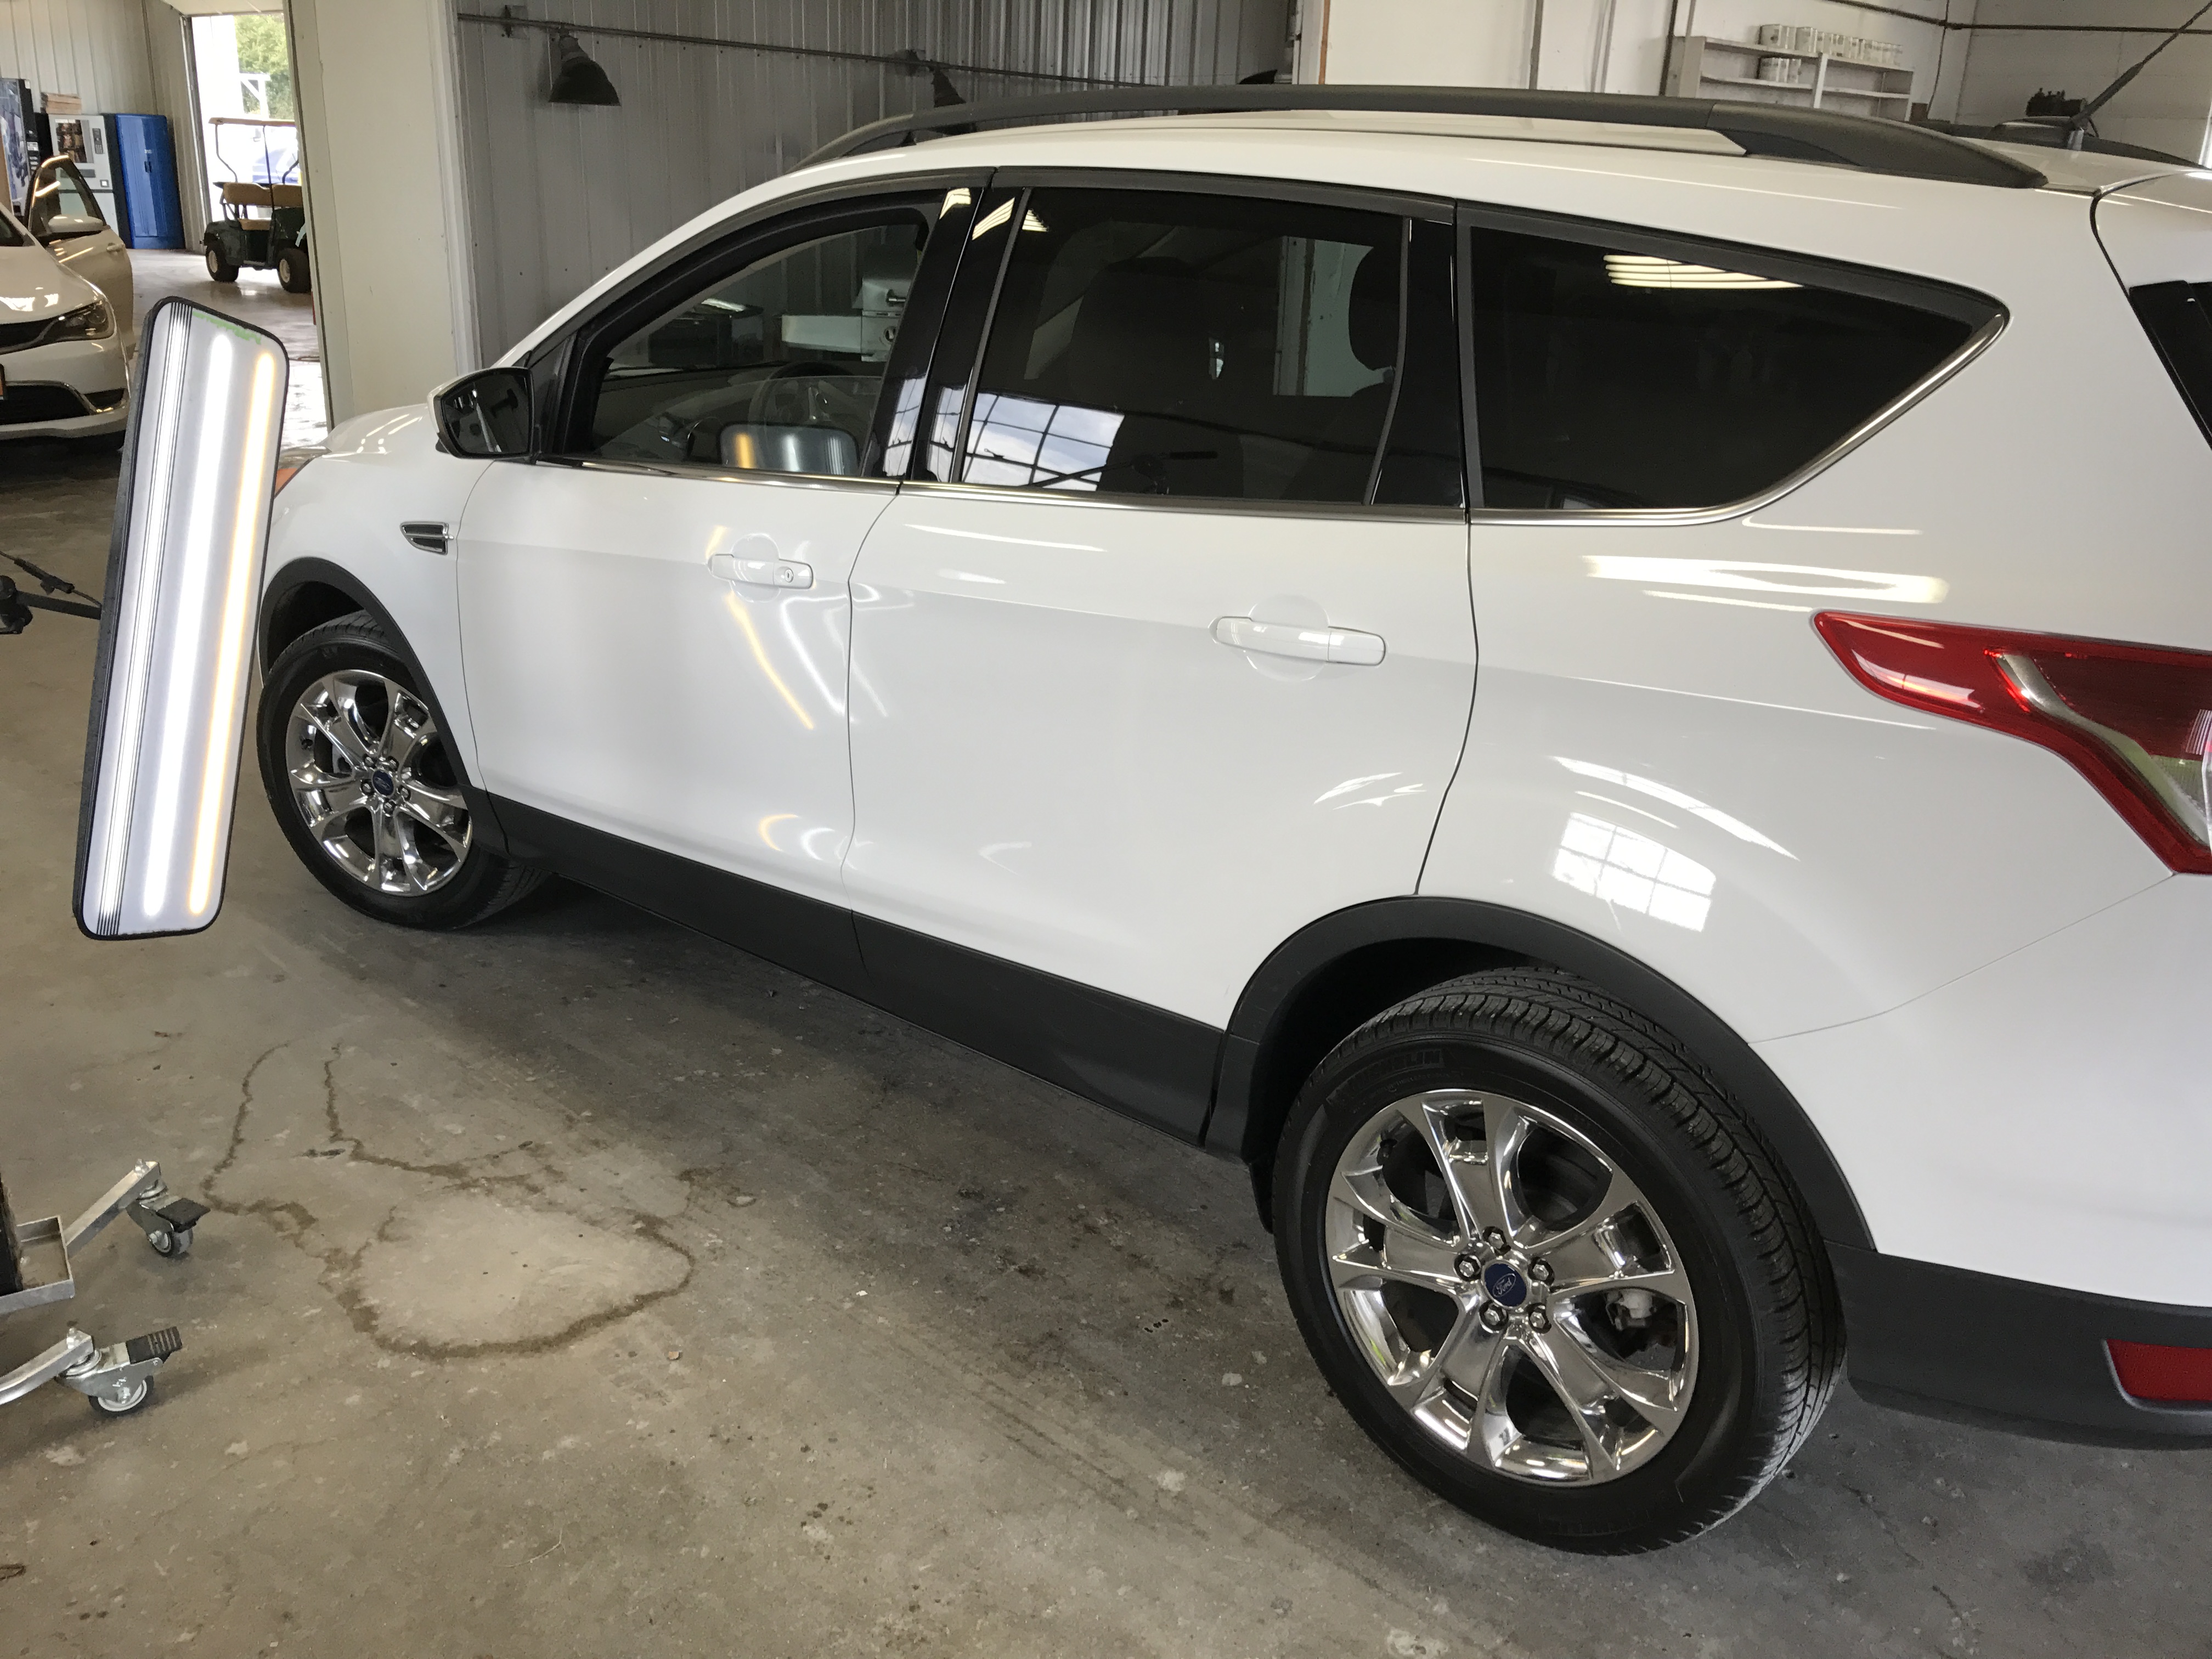 2016 Ford Escape dent removal on the drivers door, in Pana IL, Springfield IL, we are all set up and ready to make these dents disappear.